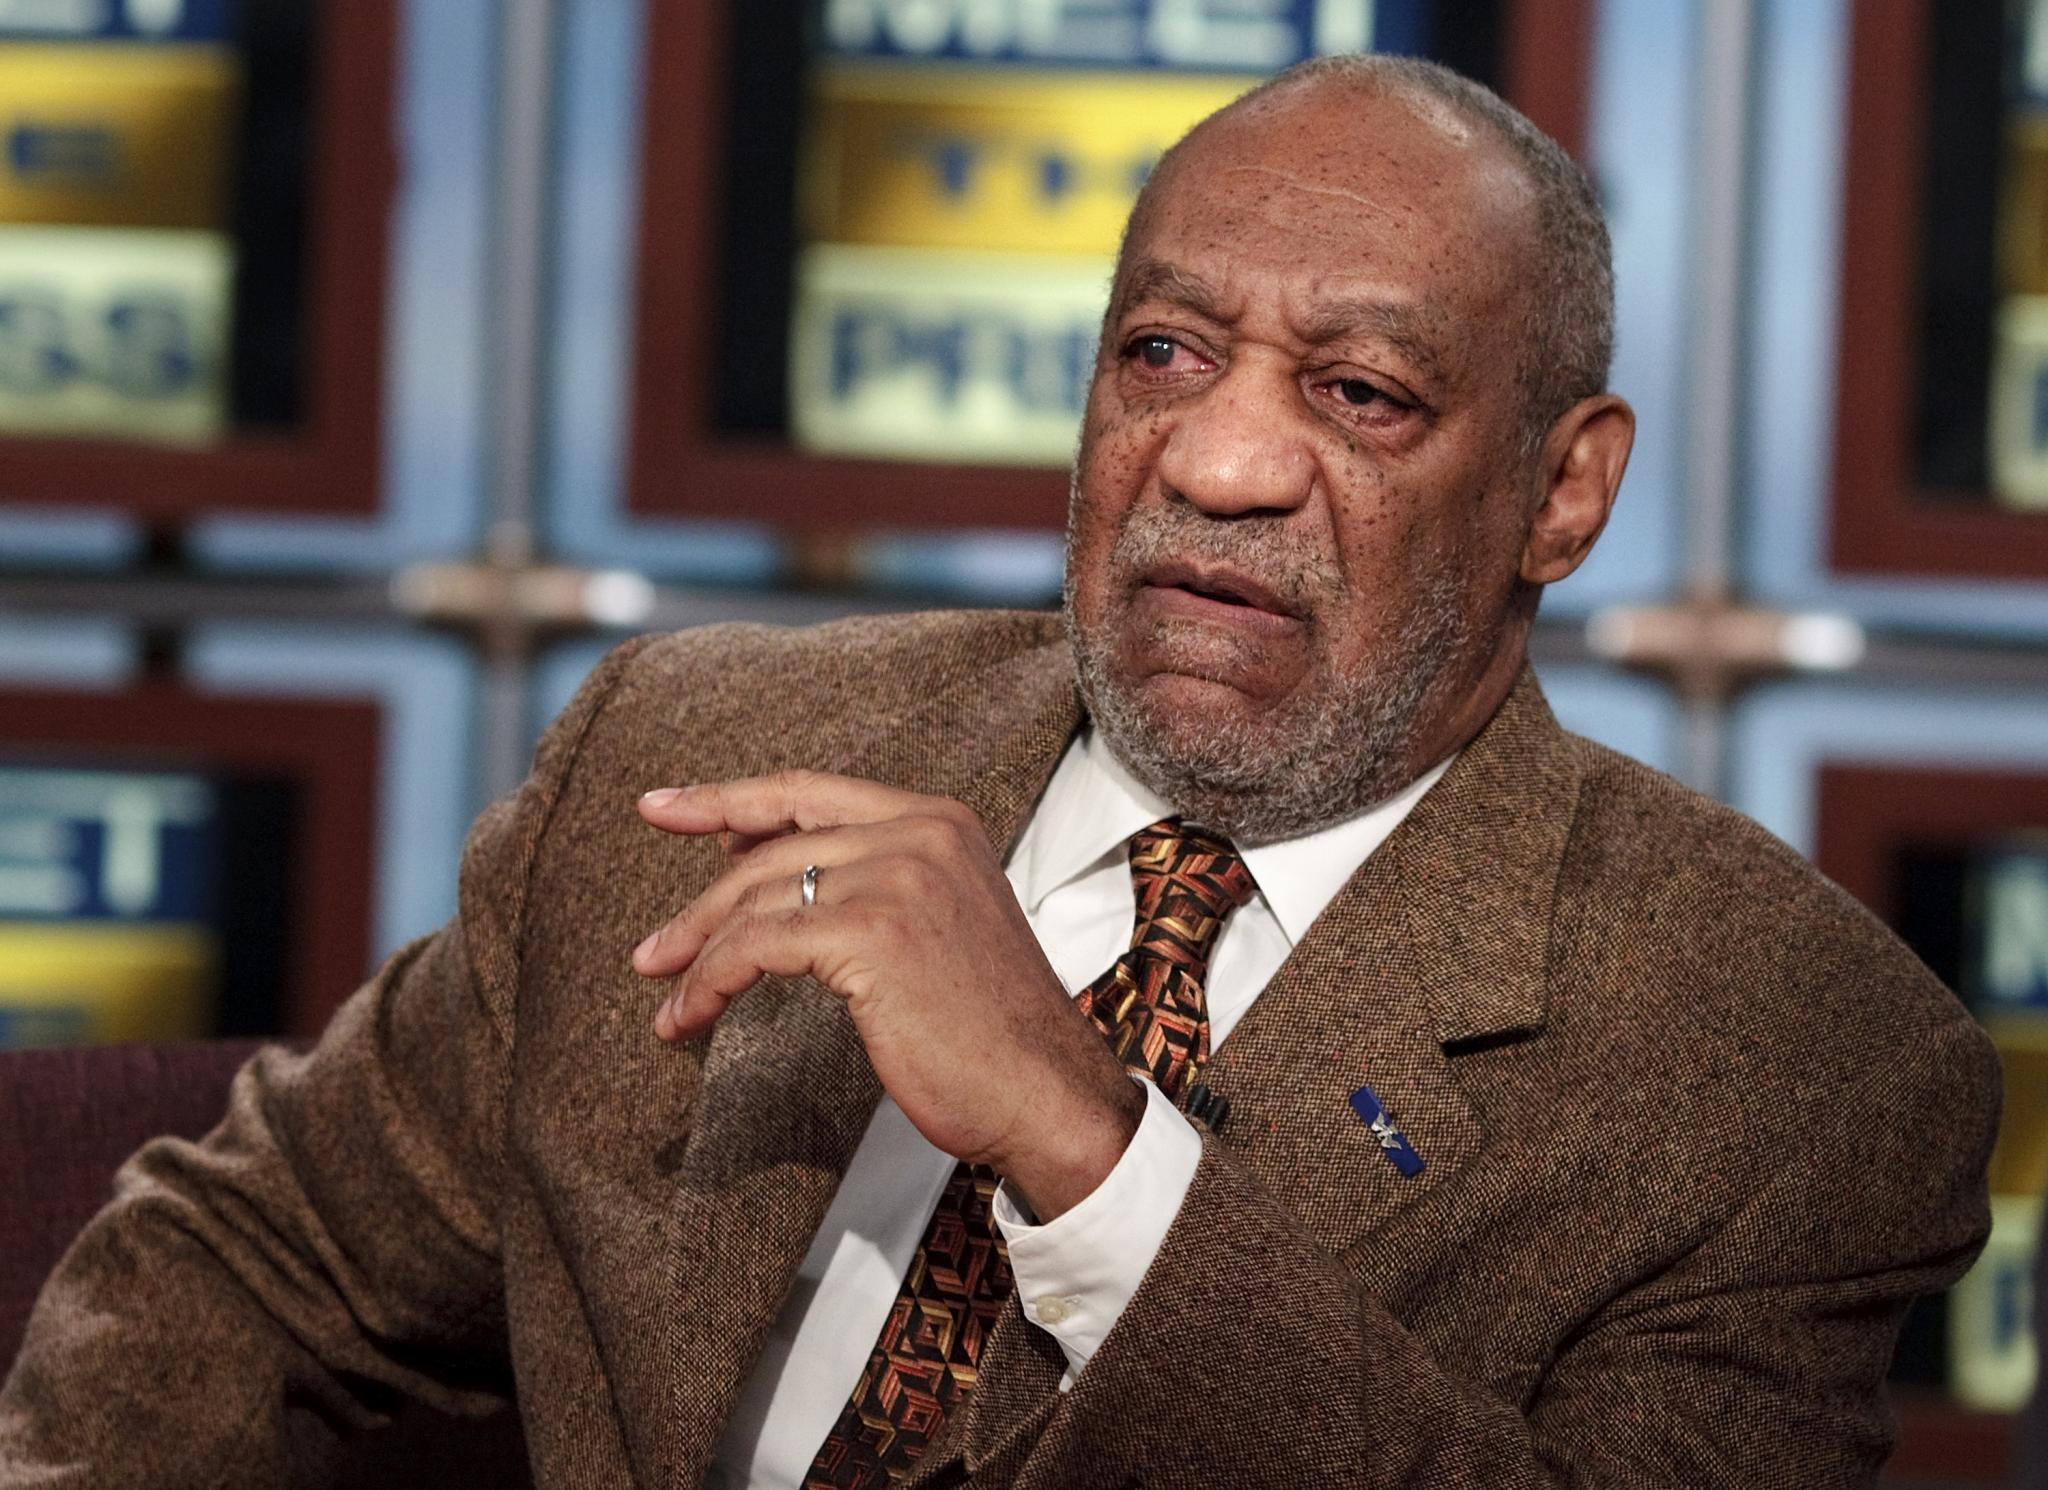 Fordham University Rescinds Bill Cosby’s Honorary Degree